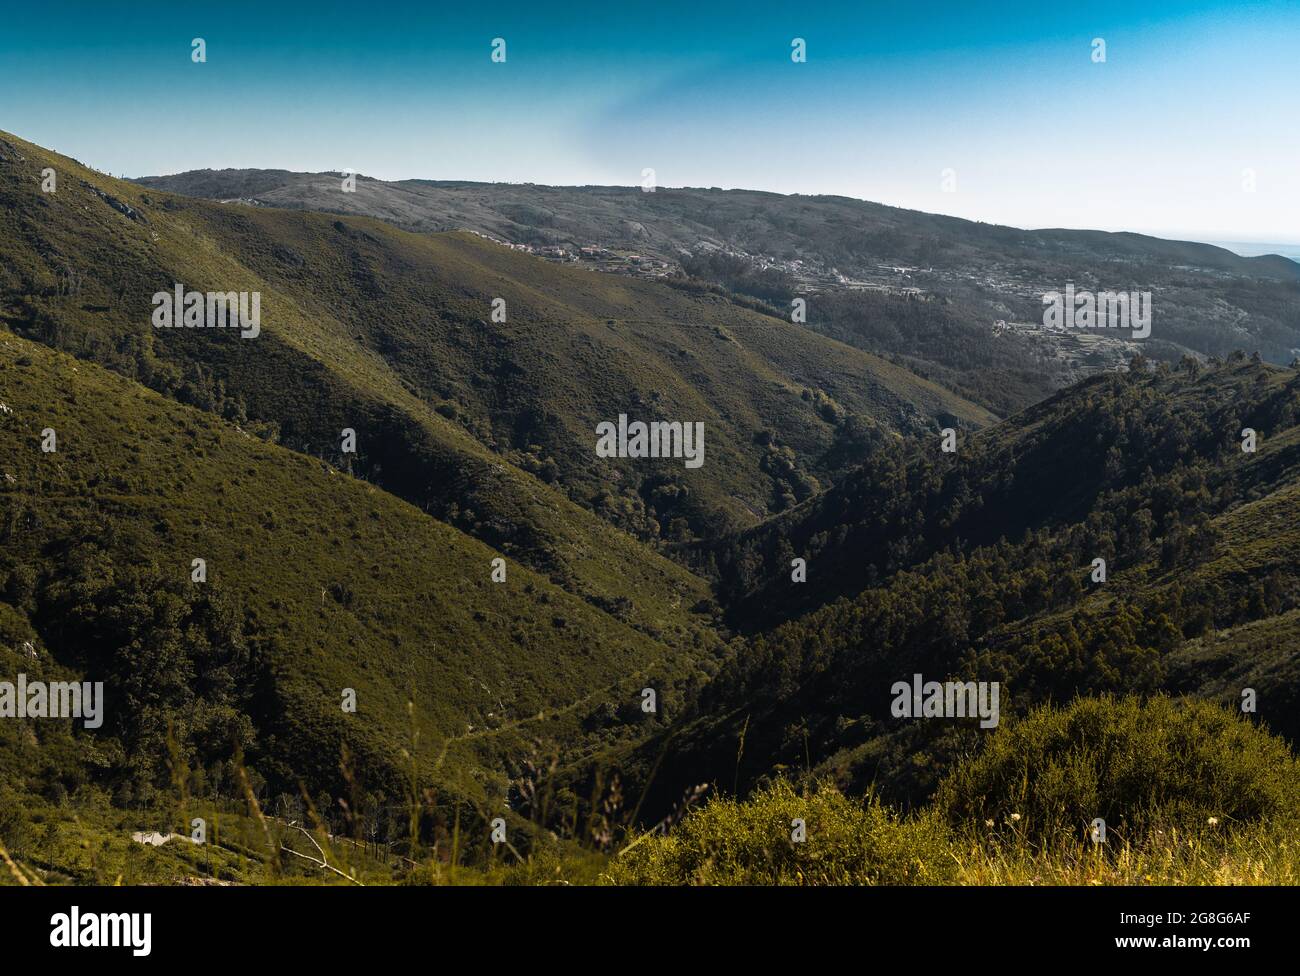 Green Mountains in Portugal Stock Photo